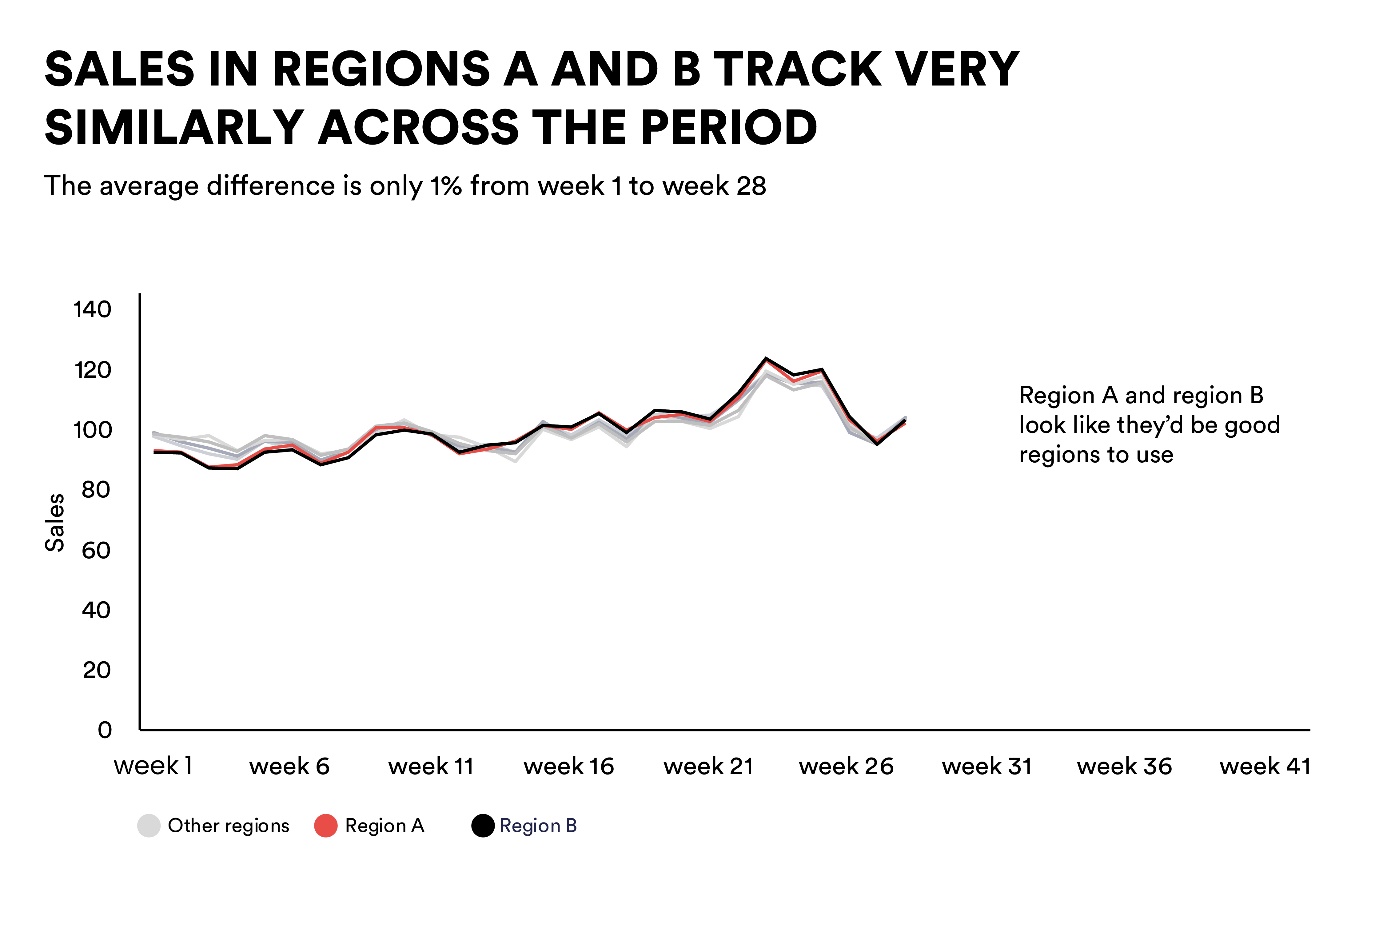 Table - Sales in regions A and B track very similarly across the period